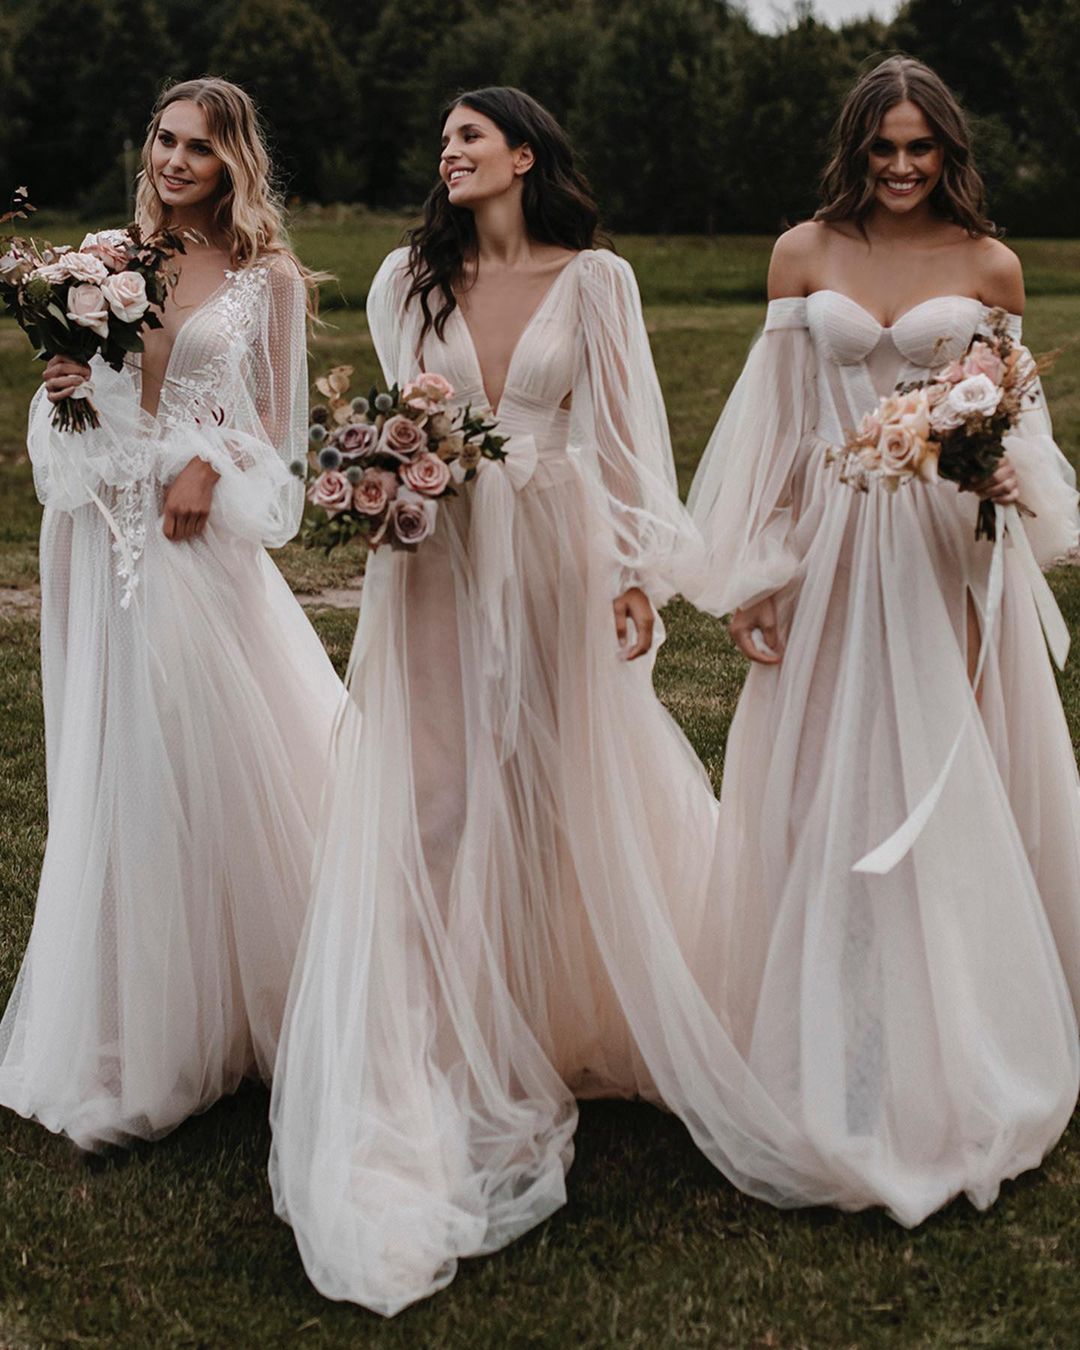 The top wedding dress trends for 2022